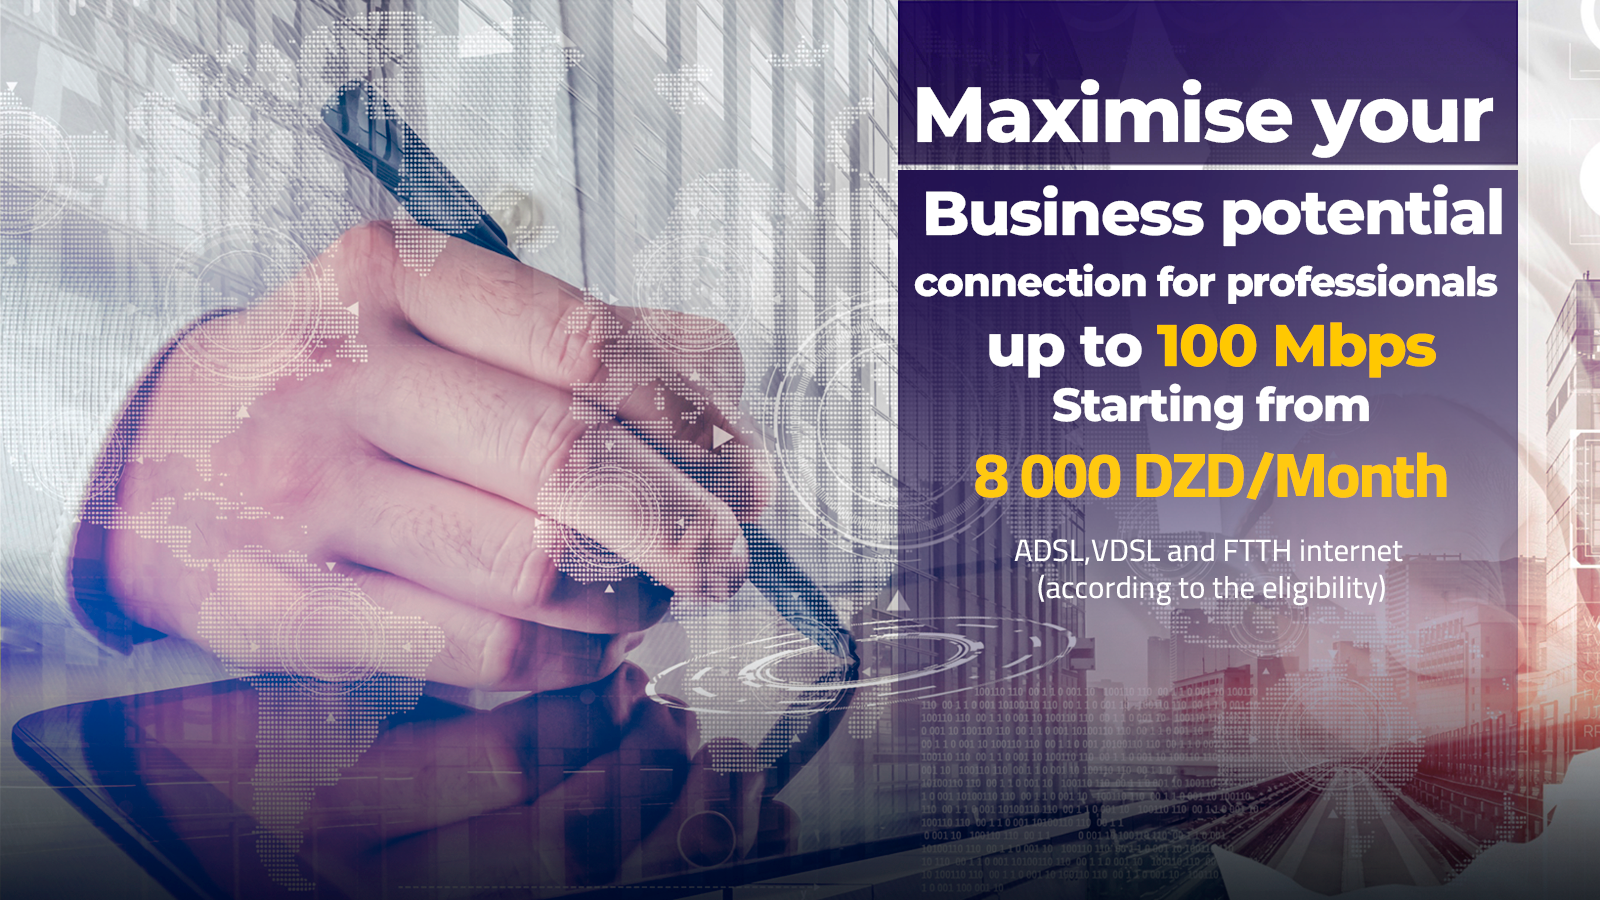 Algeria Telecom launches new offers for businesses and professionals!